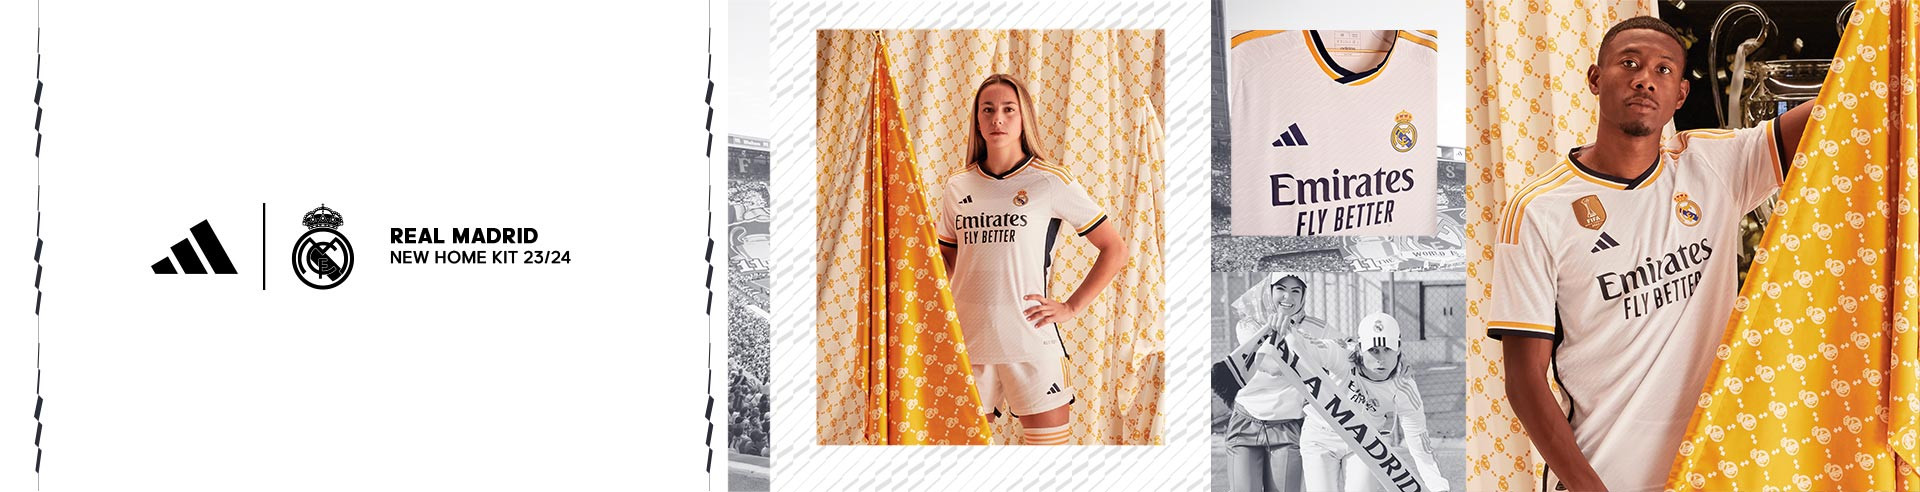 adidas Real Madrid New Home Kit 23/24 ALL